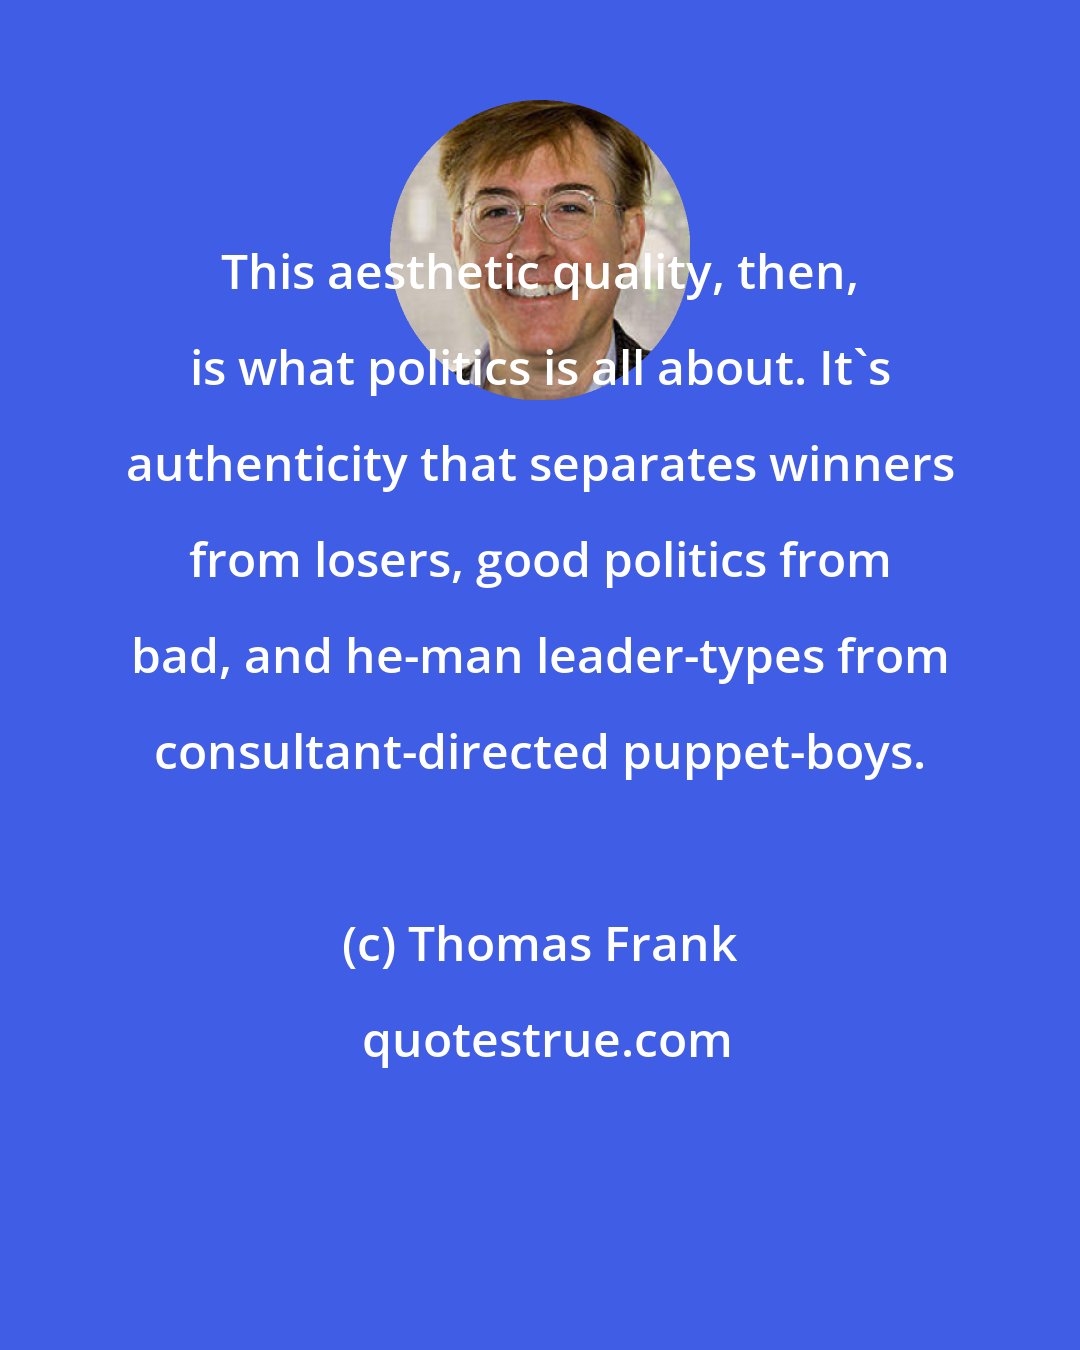 Thomas Frank: This aesthetic quality, then, is what politics is all about. It's authenticity that separates winners from losers, good politics from bad, and he-man leader-types from consultant-directed puppet-boys.